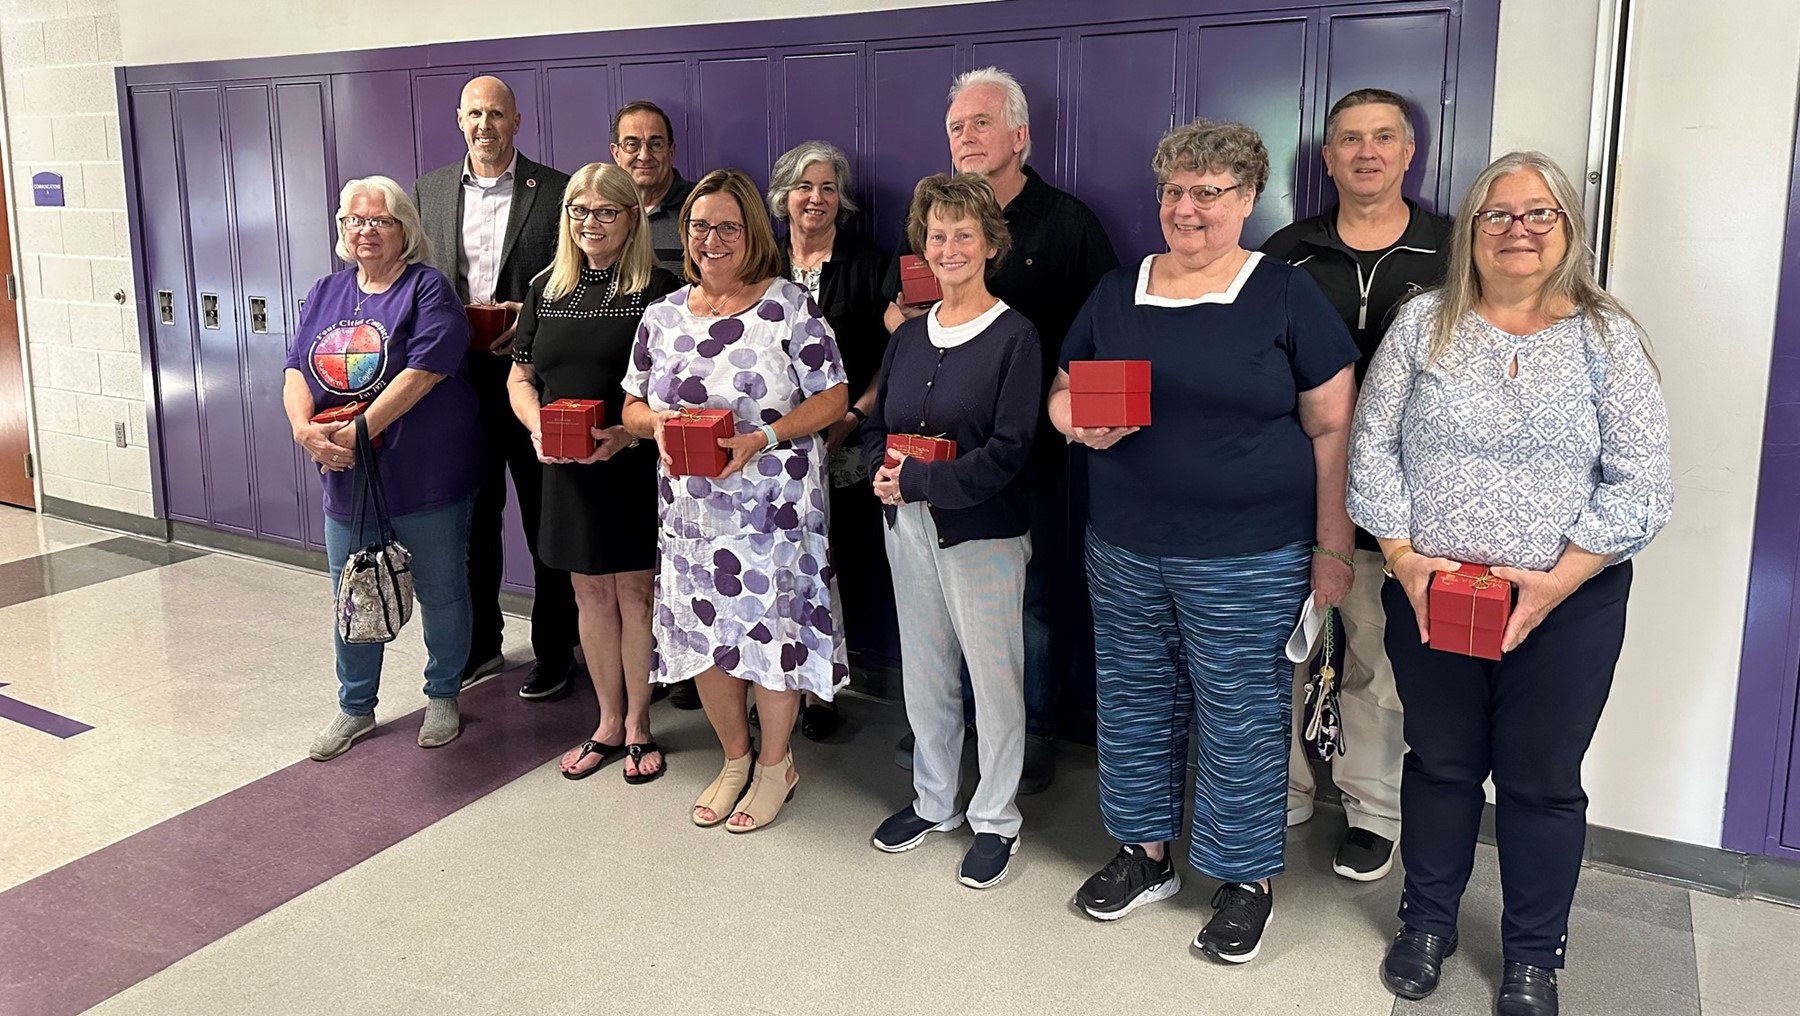 Congratulations to our 2022-2023 Retirees!